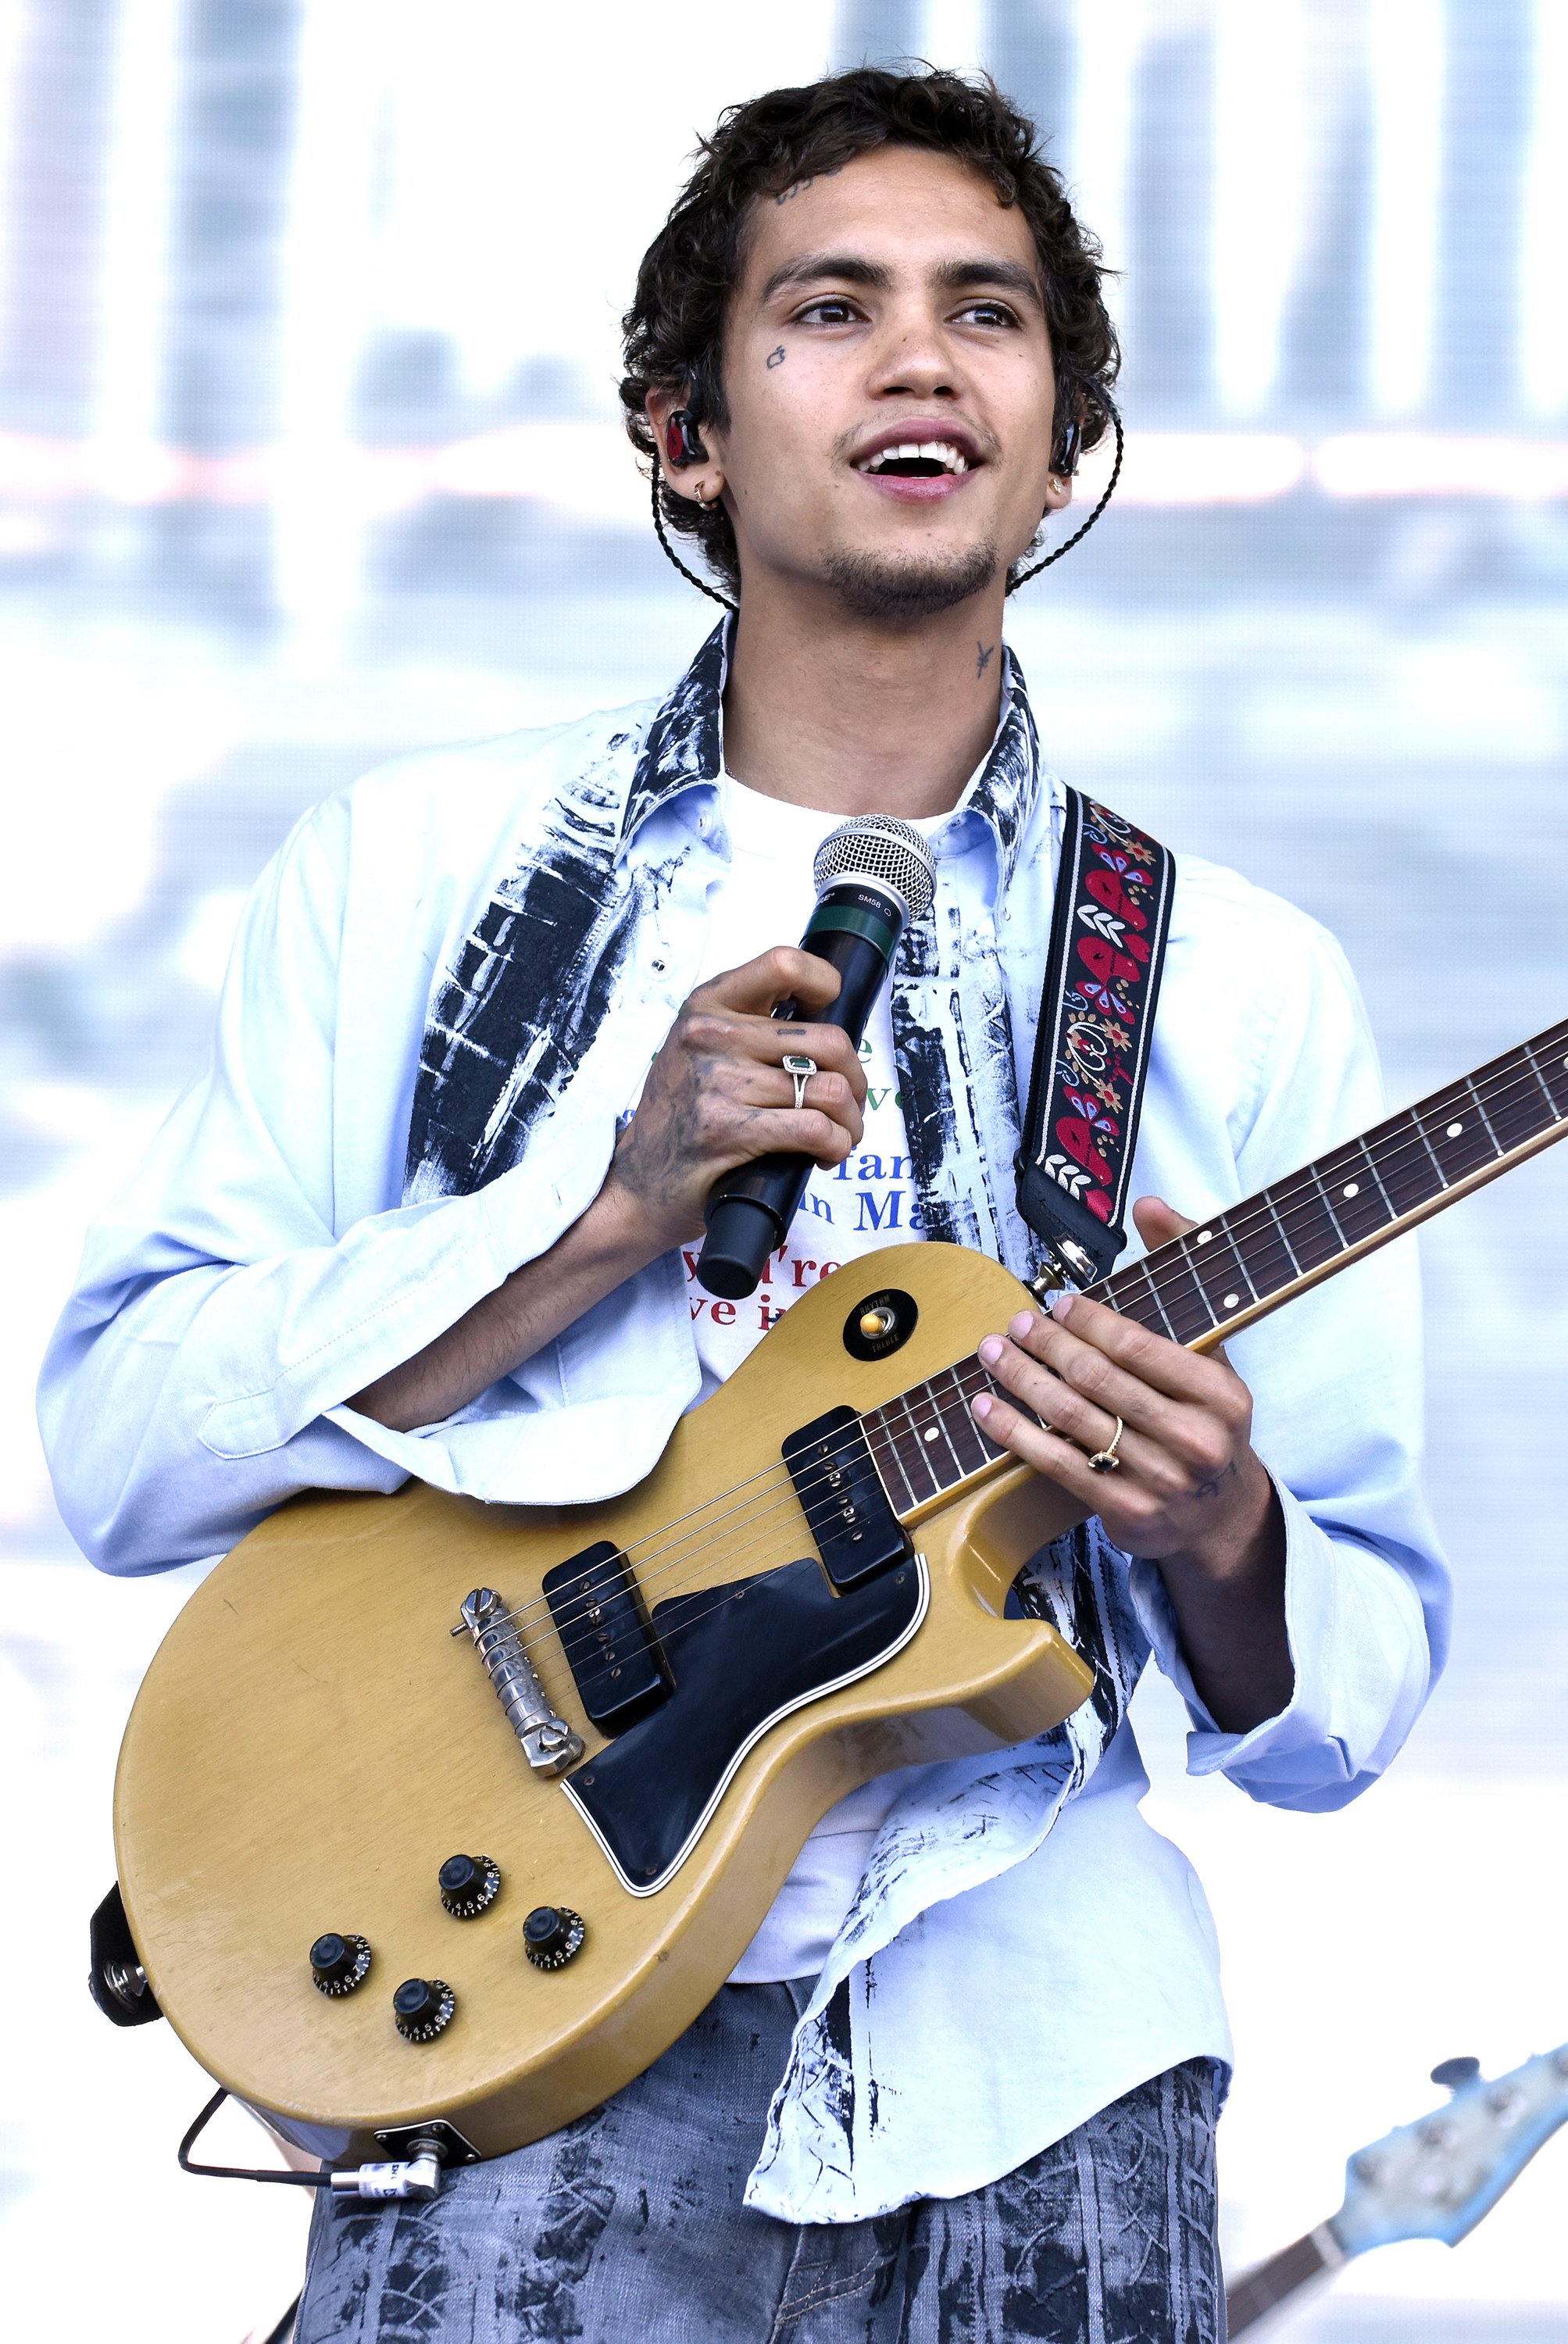 Dominic Fike performing at the 2022 Outside Lands Music and Arts Festival in San Francisco | Source: Getty Images